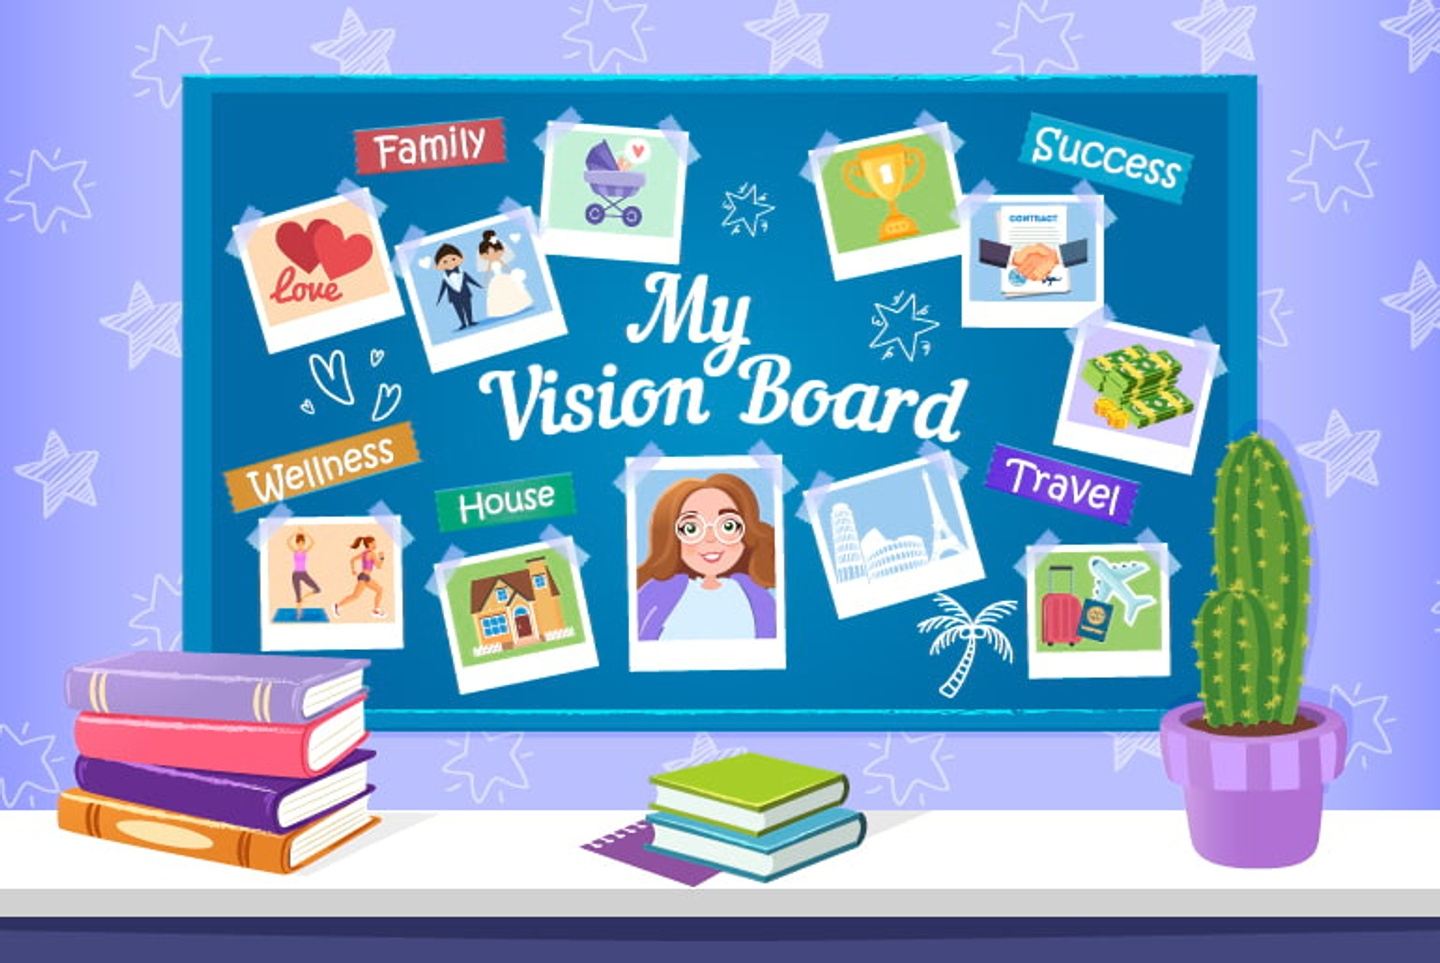 Being board. Vision Board. Доска целей. Visualization Board. Travel Vision Board.